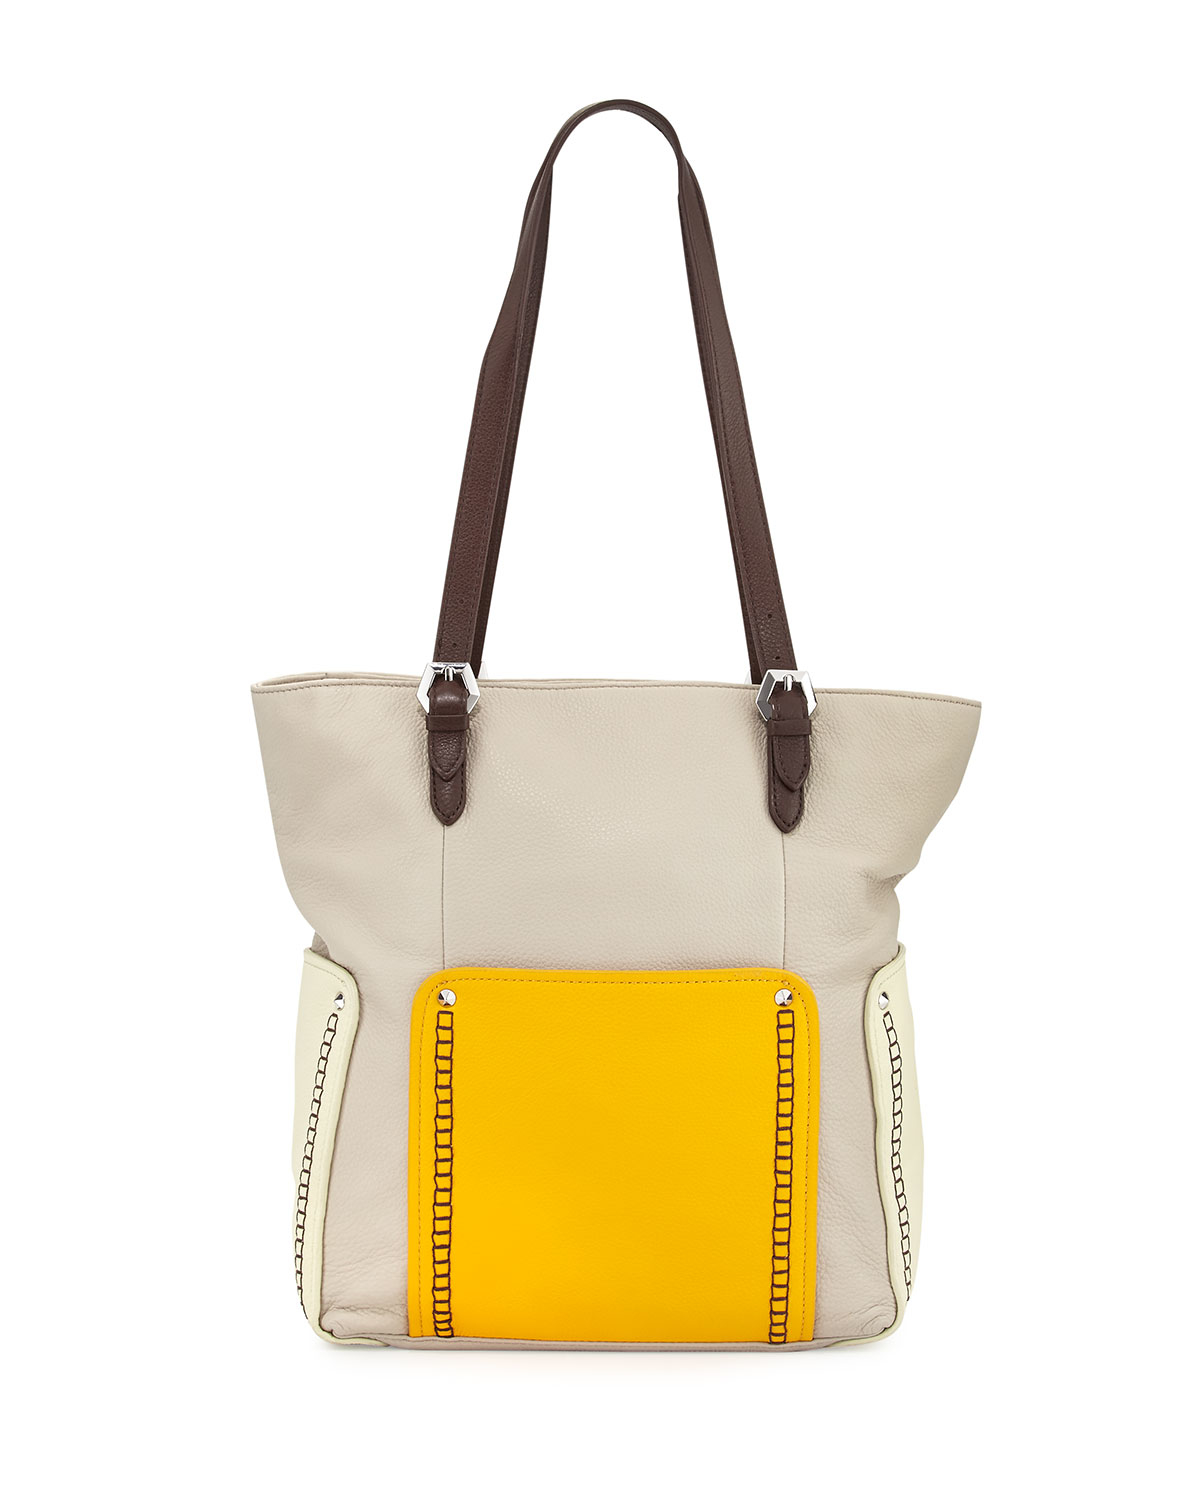 Lyst - Oryany Brooklyn Leather Tote Bag in Natural